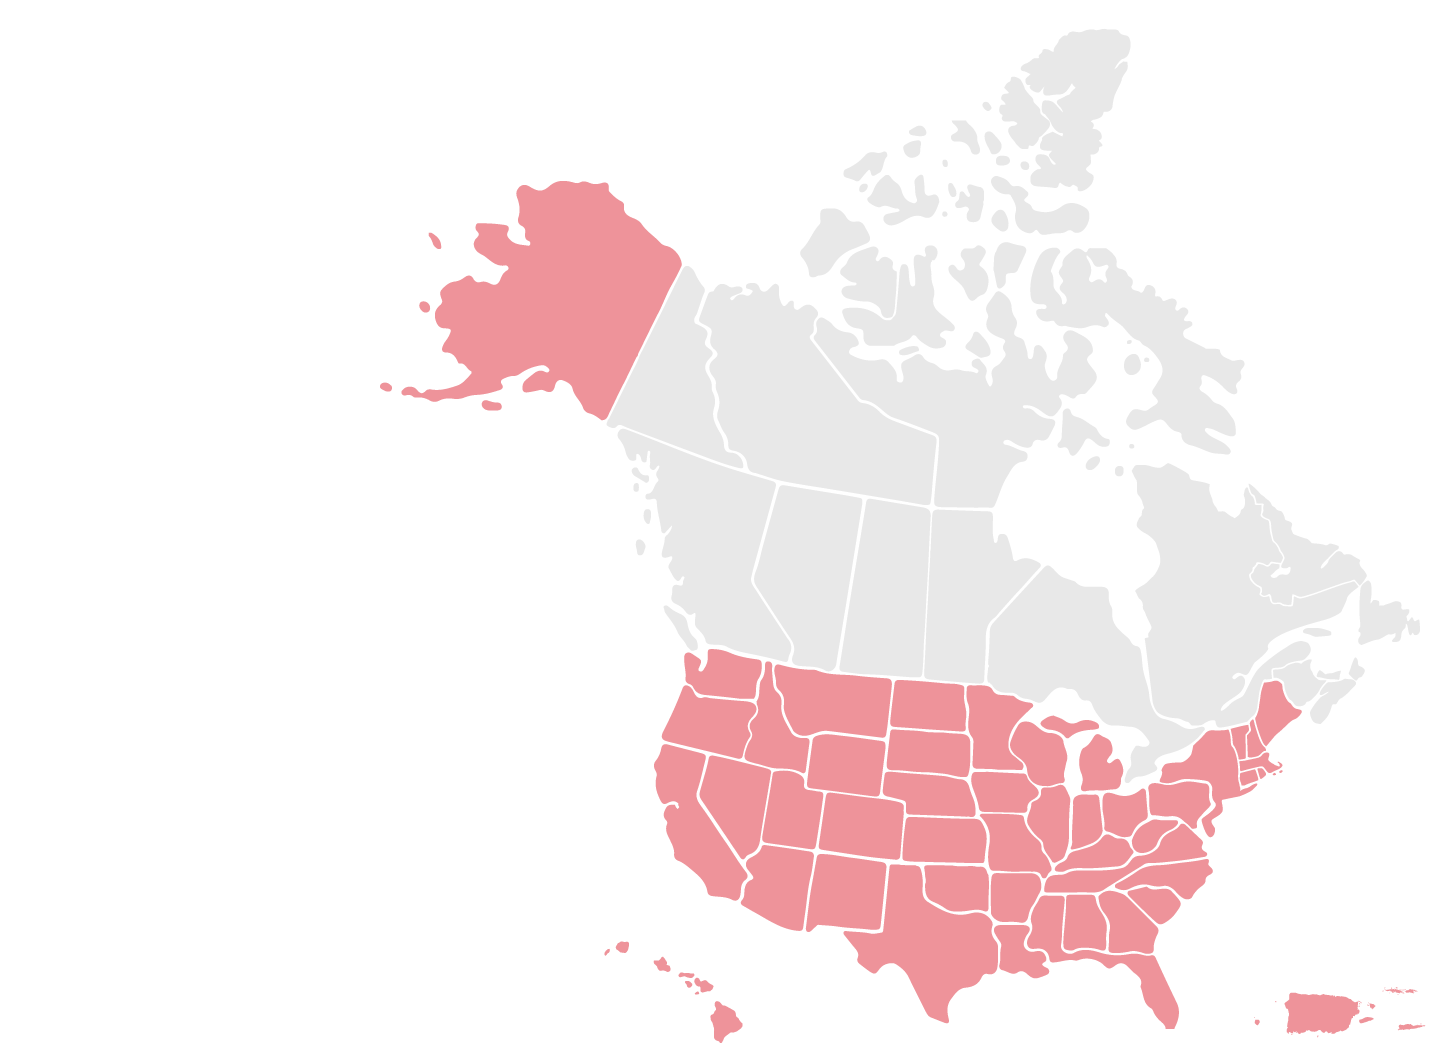 US and Canada map with all US states highlighted in red